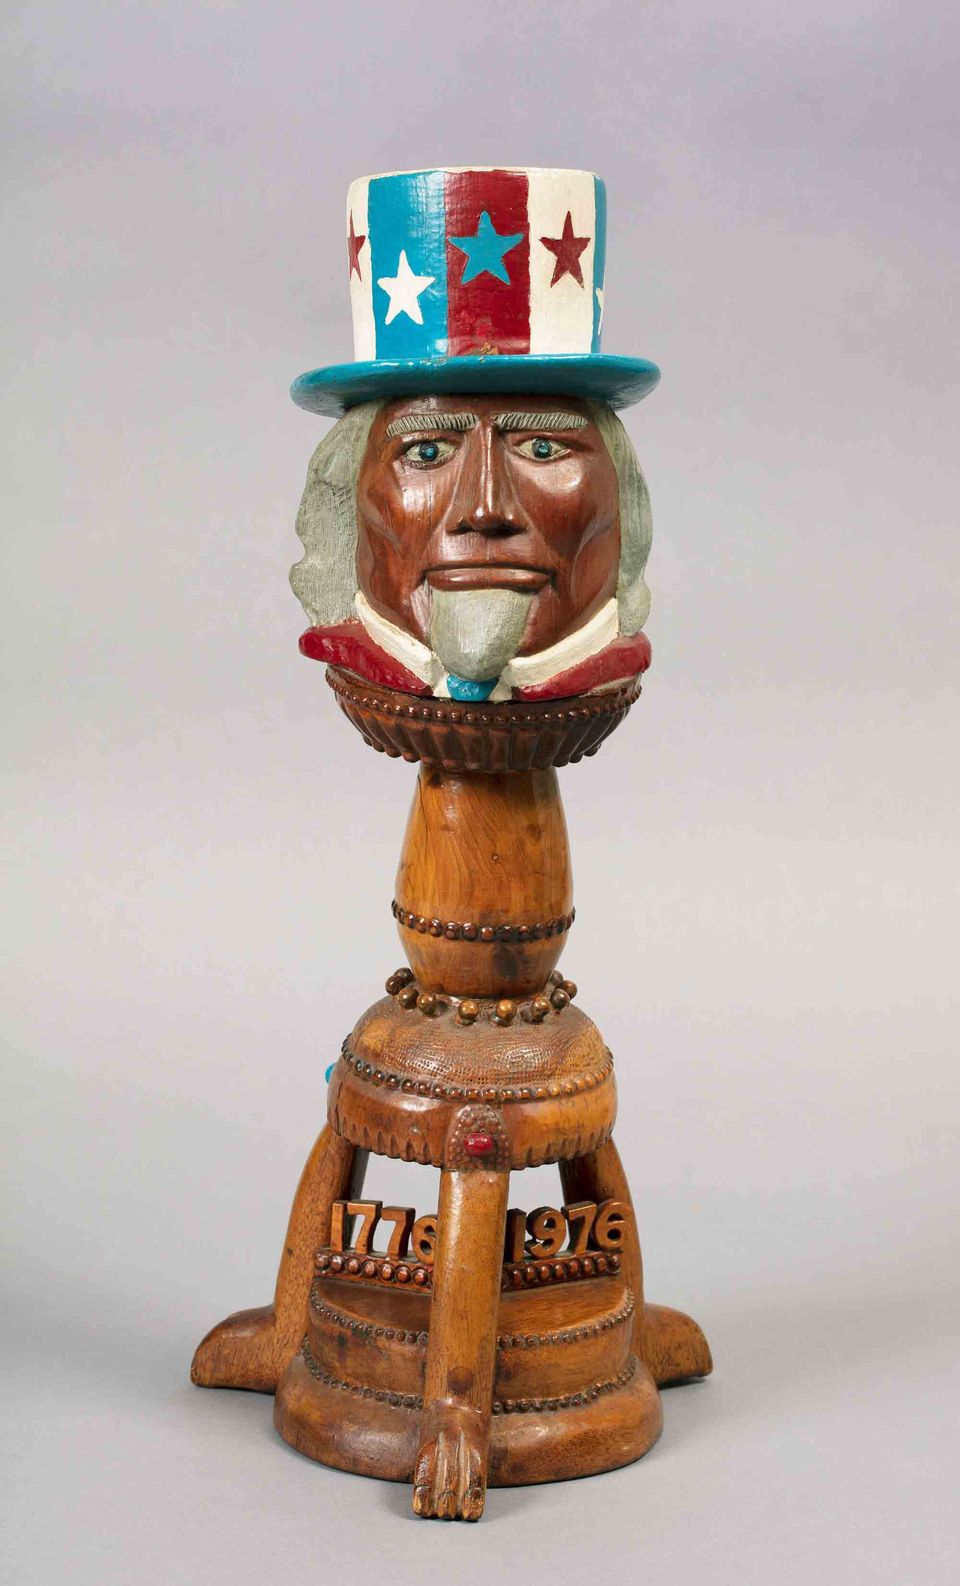 A carved and painted wooden sculpture topped by the head of Unlce Sam.